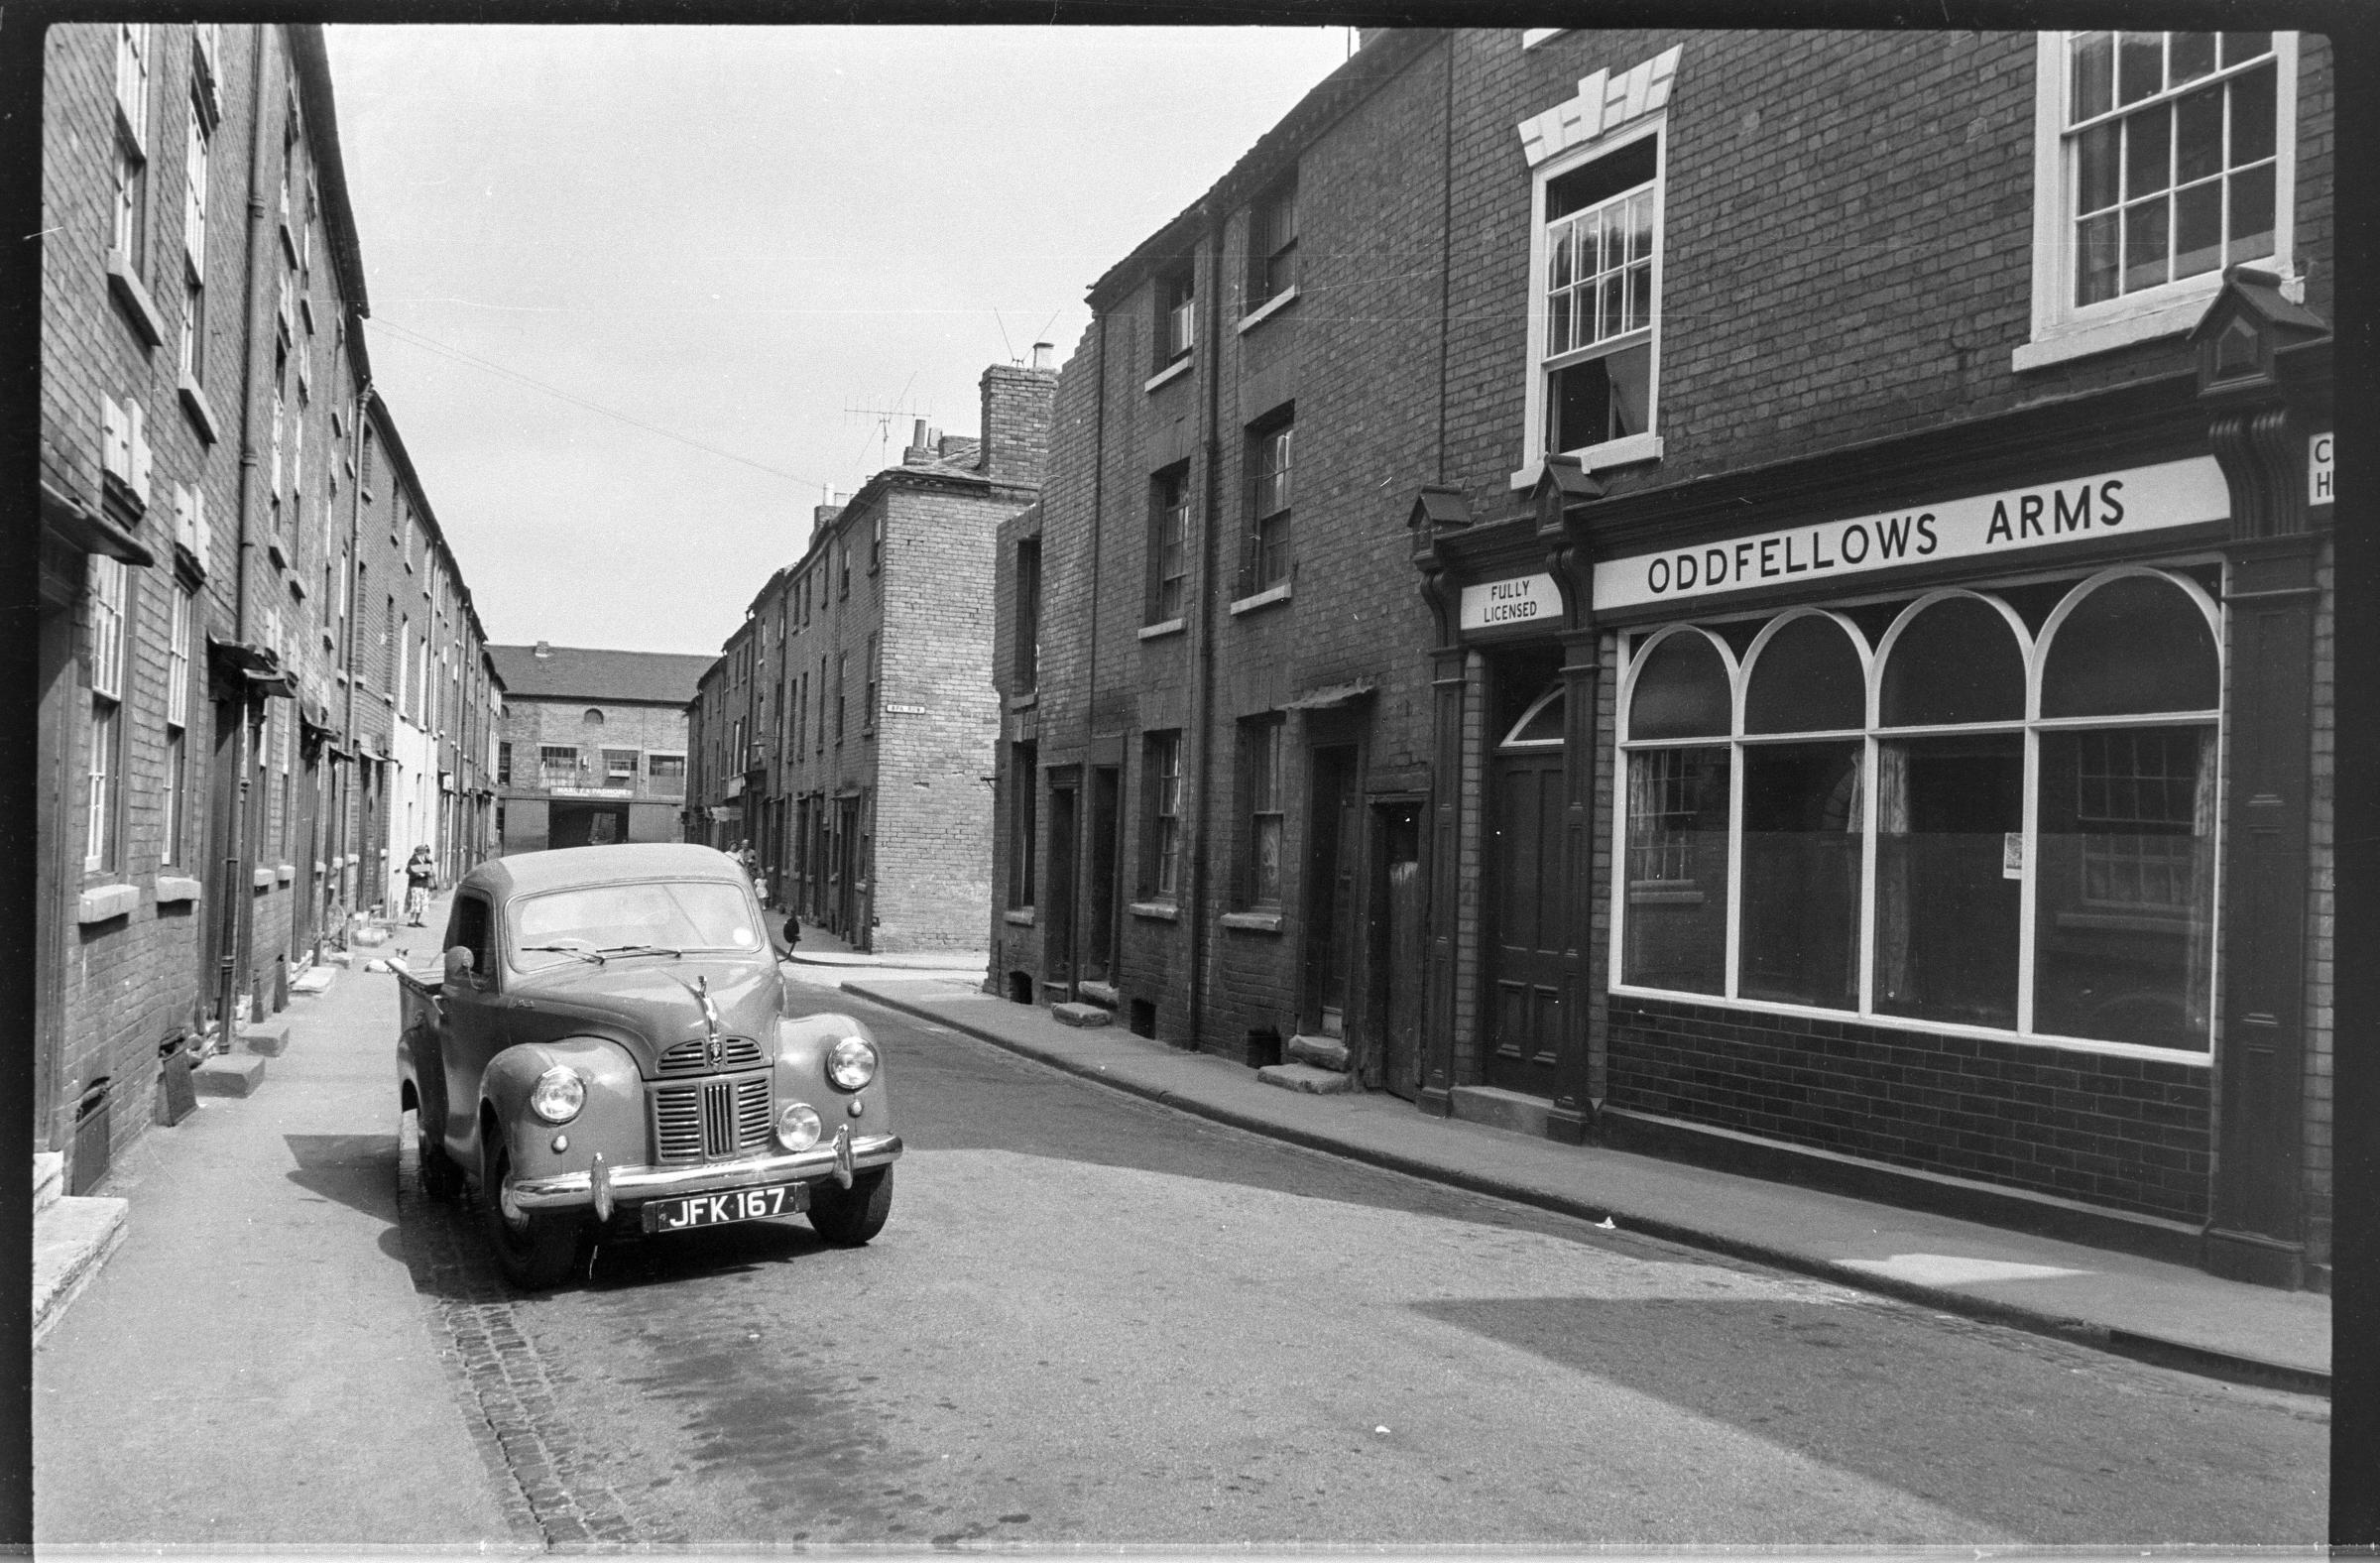 The approach to the Worcester Foundry (seen in the distance) along Carden Street, late 1950s